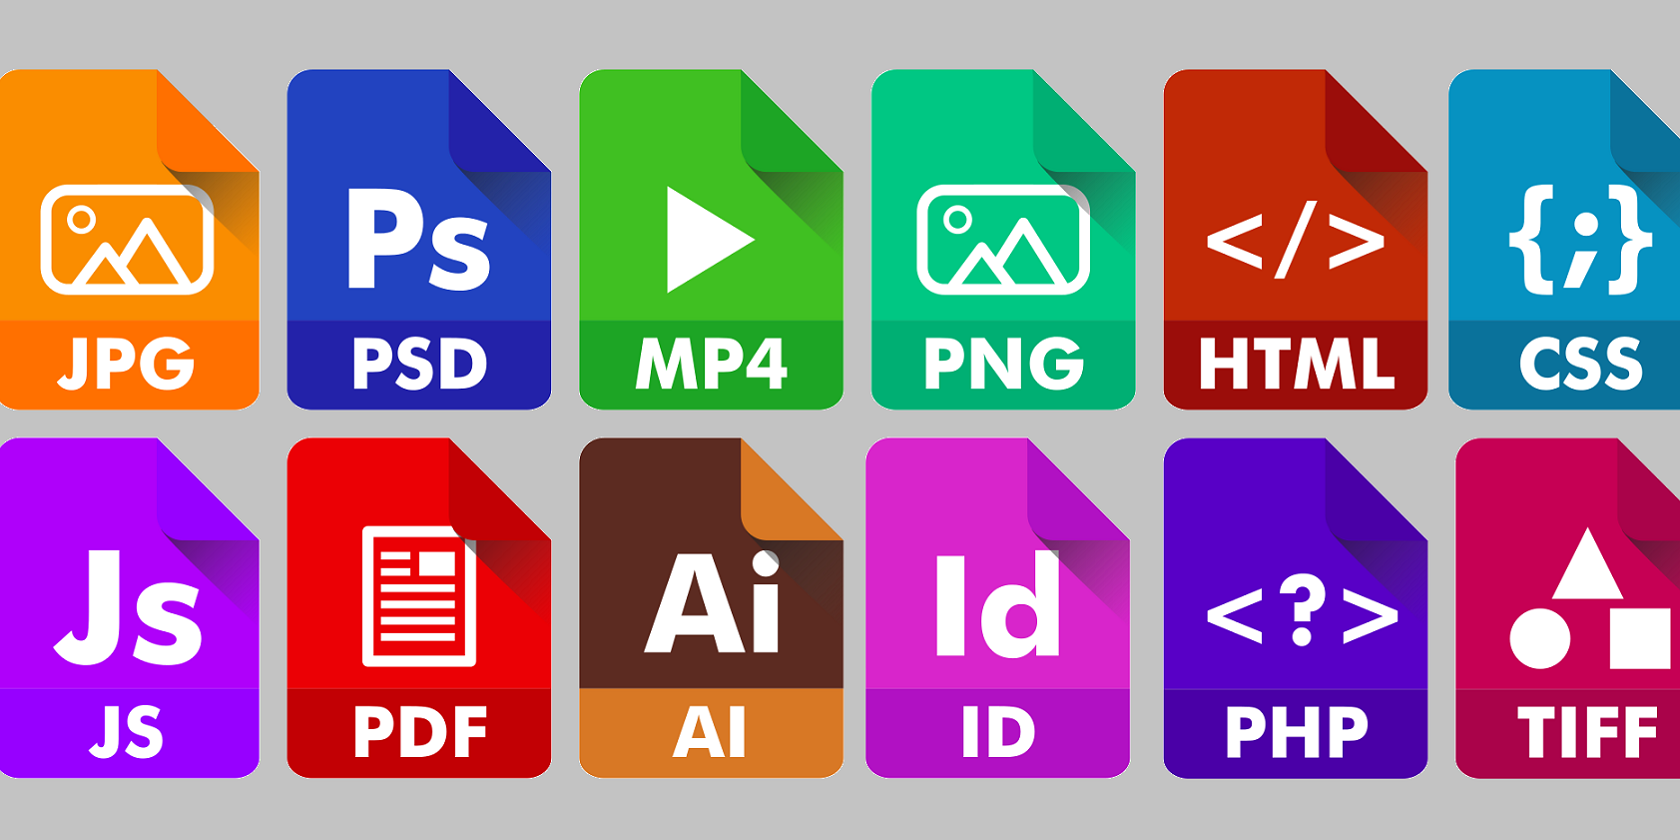 File format icons